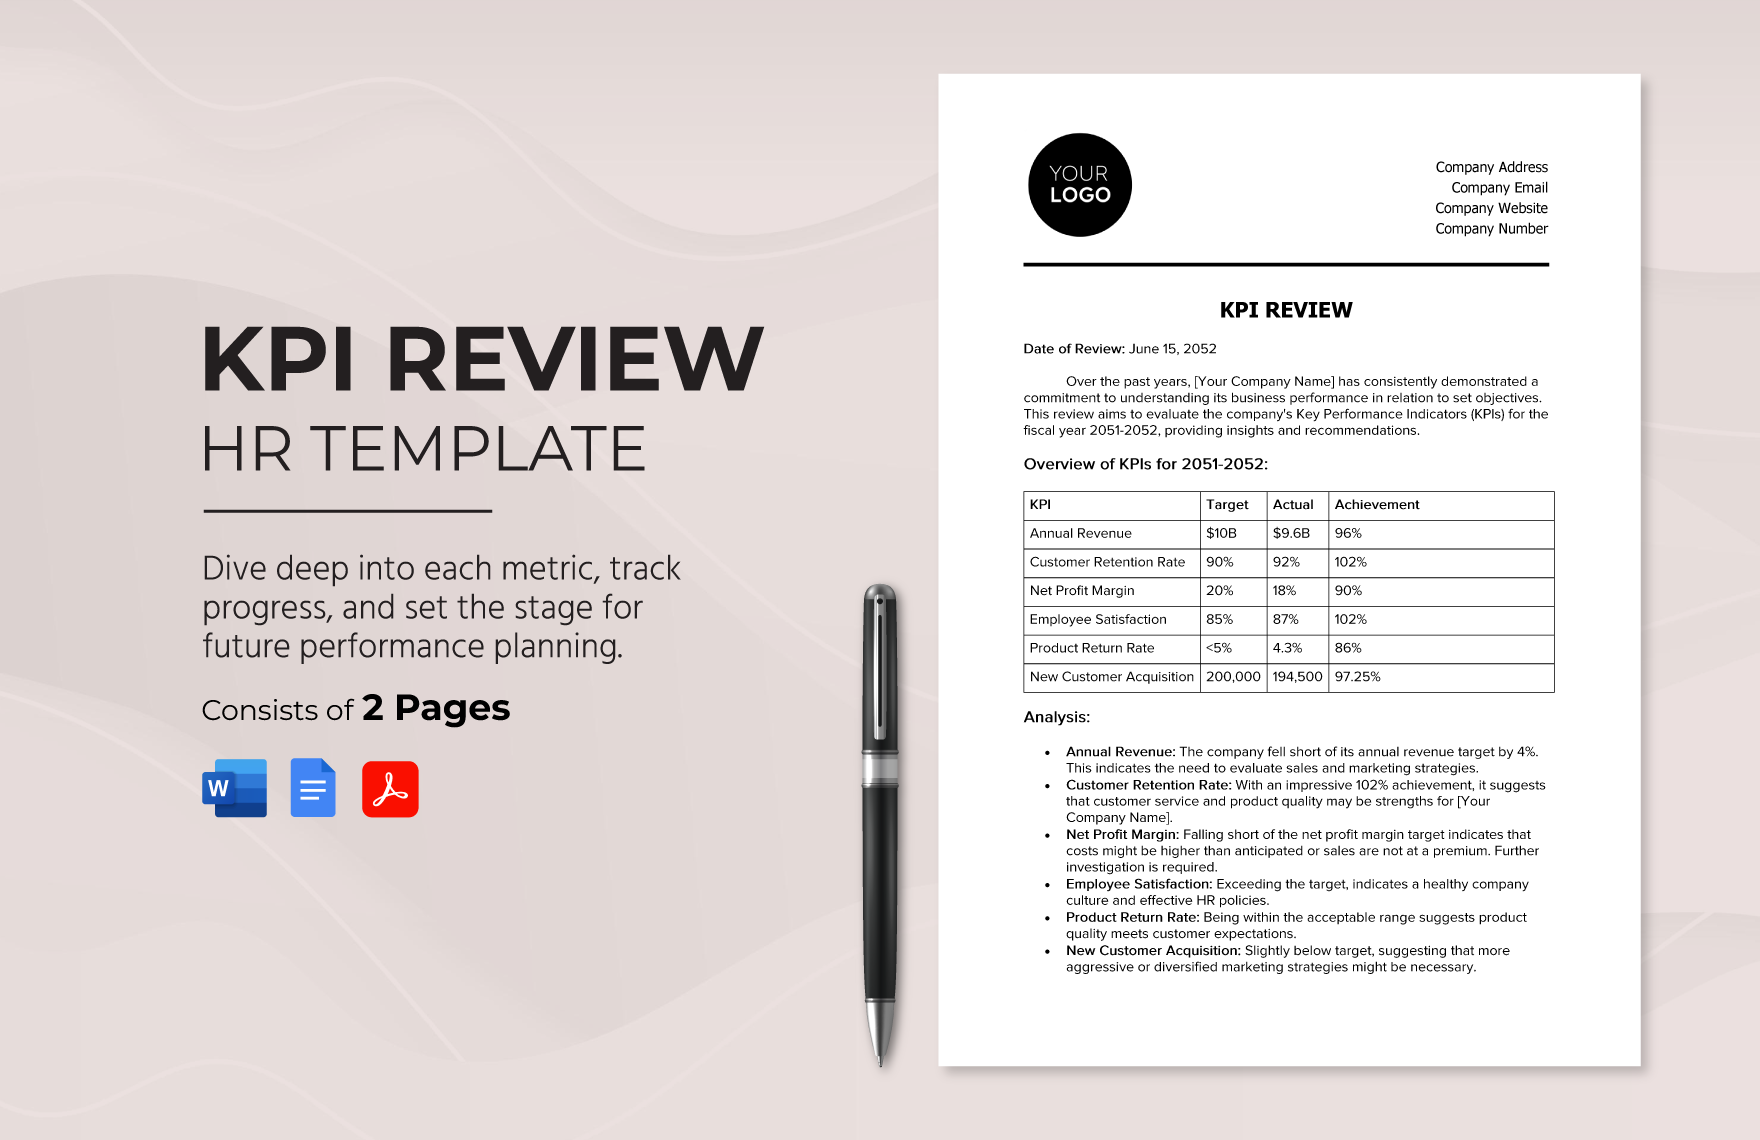 KPI Review HR Template in Word, Google Docs, PDF